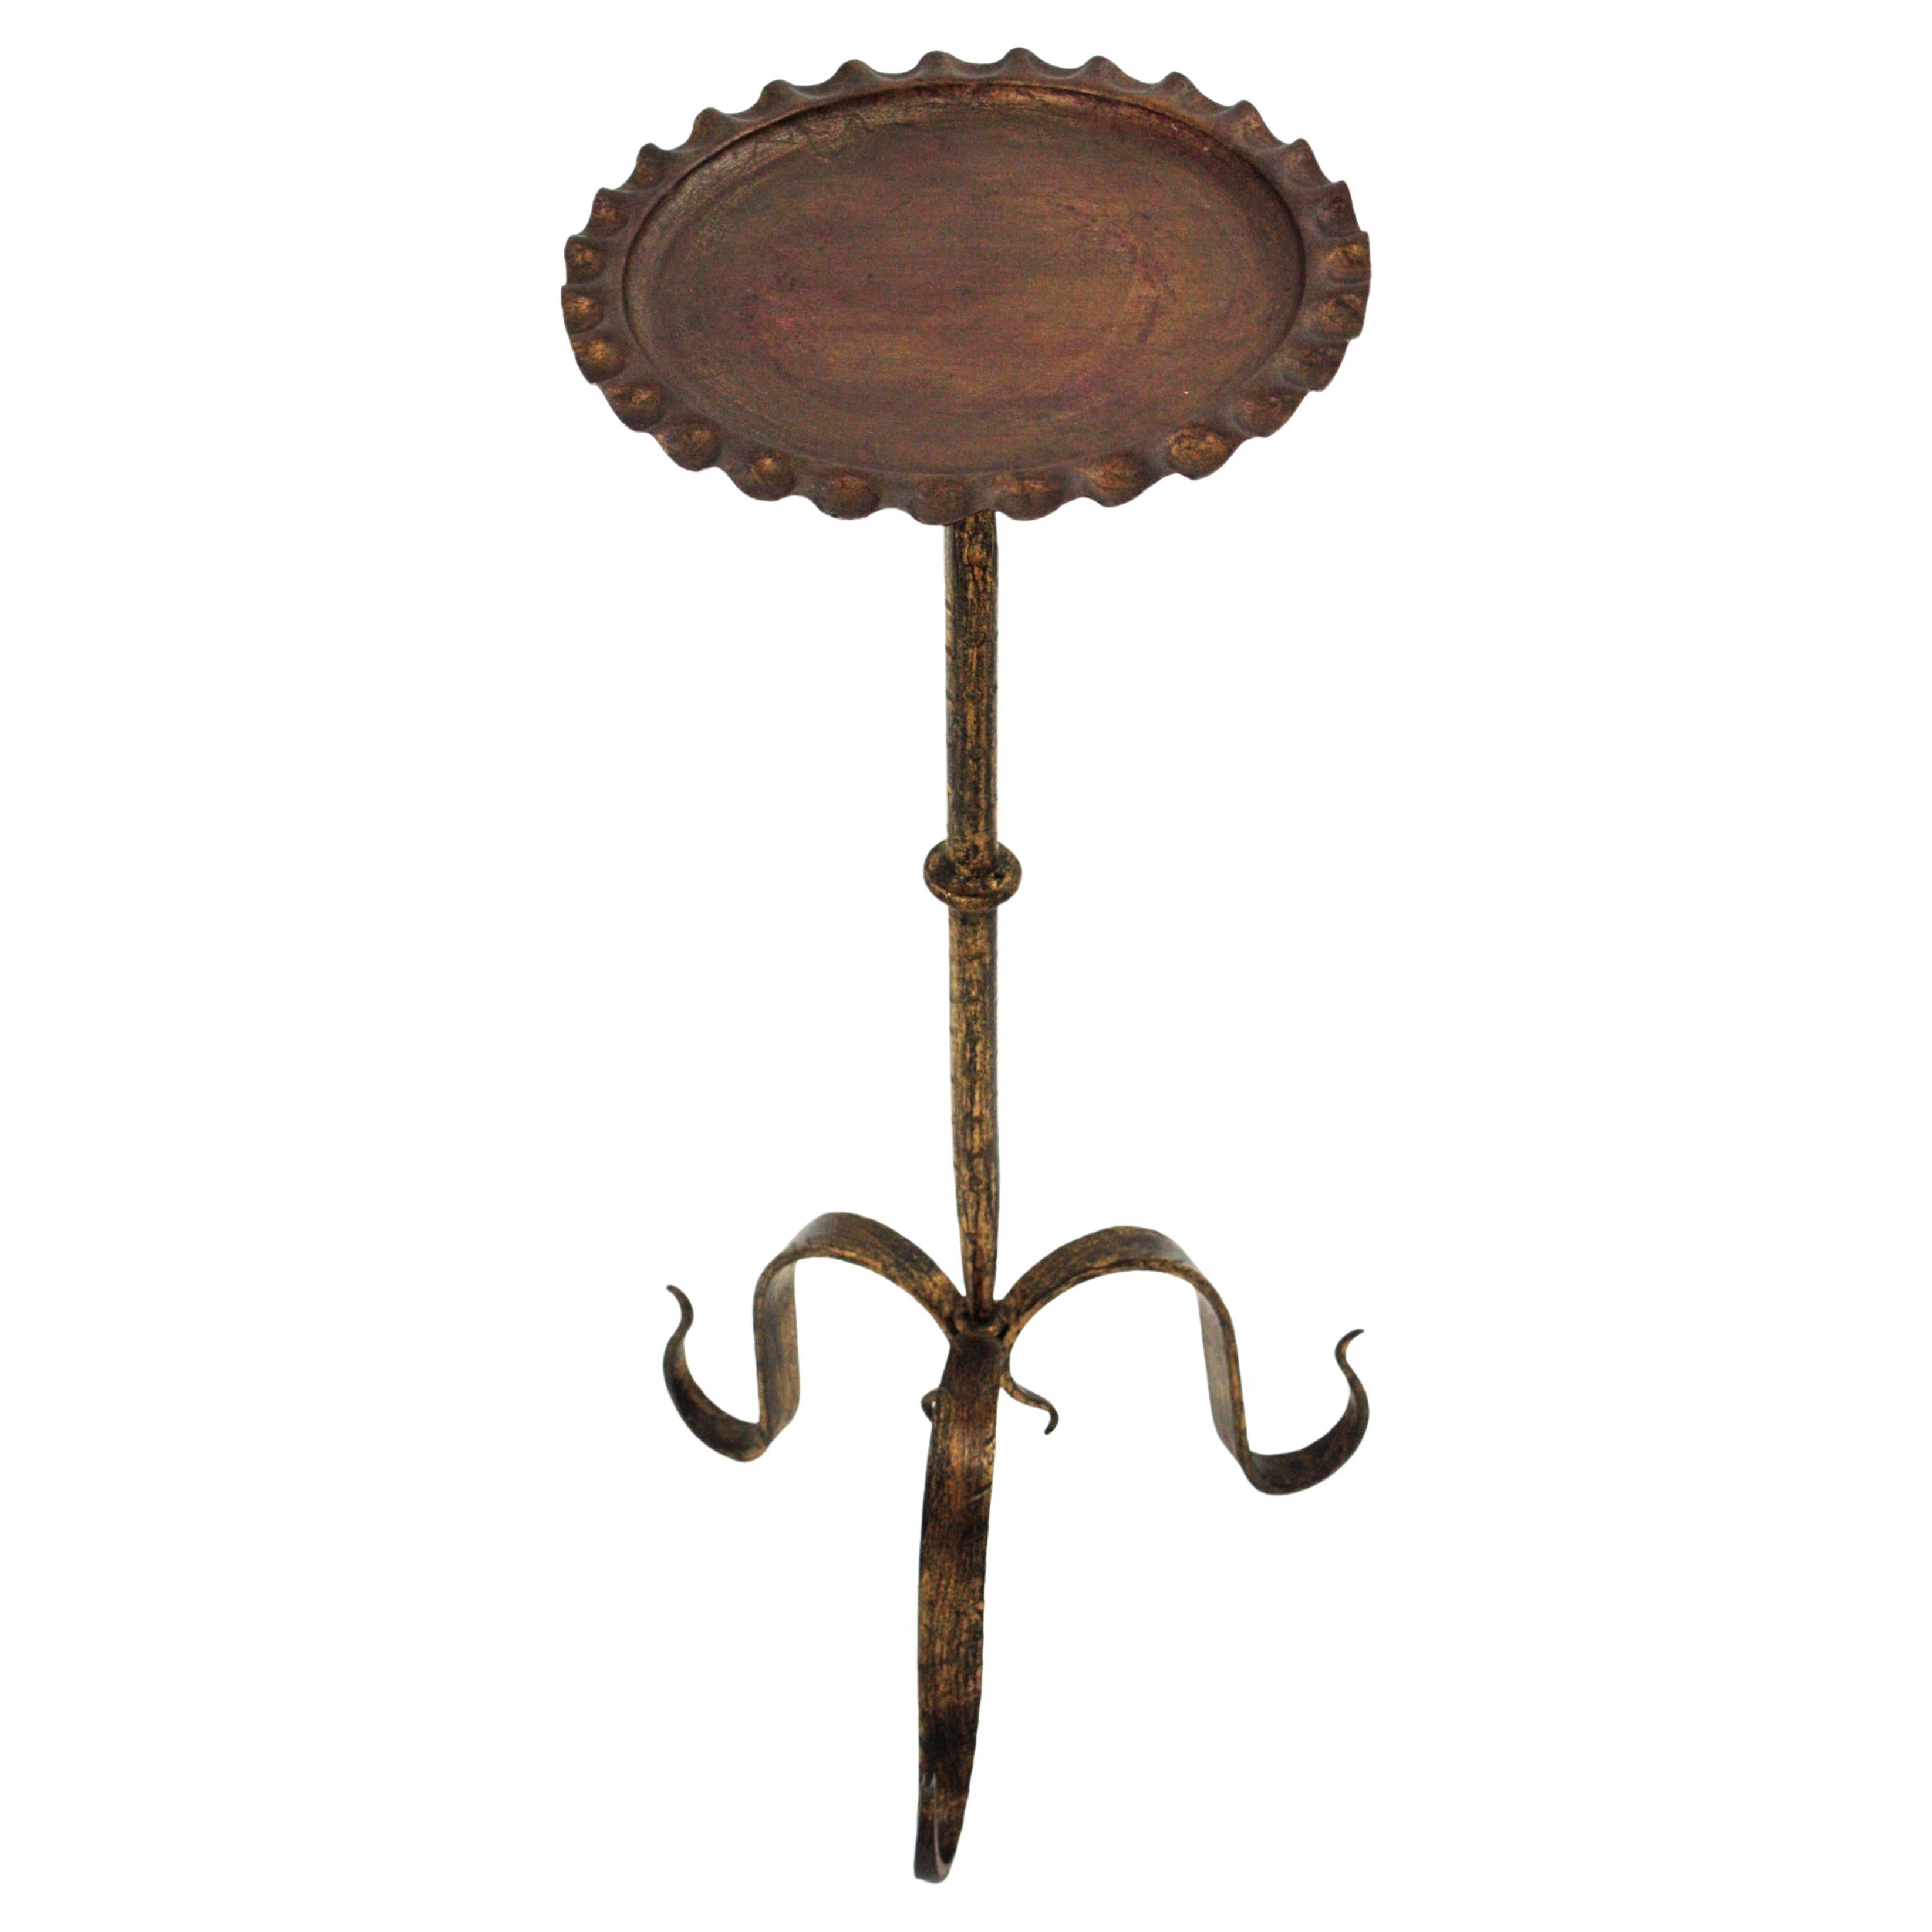 French gilt wrough iron drinks table gueridon, end or side table. Manufactured in France, 1940s.
This pedestal table has a round top with wavy edge heavily decored by the hammer work. It stands on a tripod base with curved scrolled feedt with a